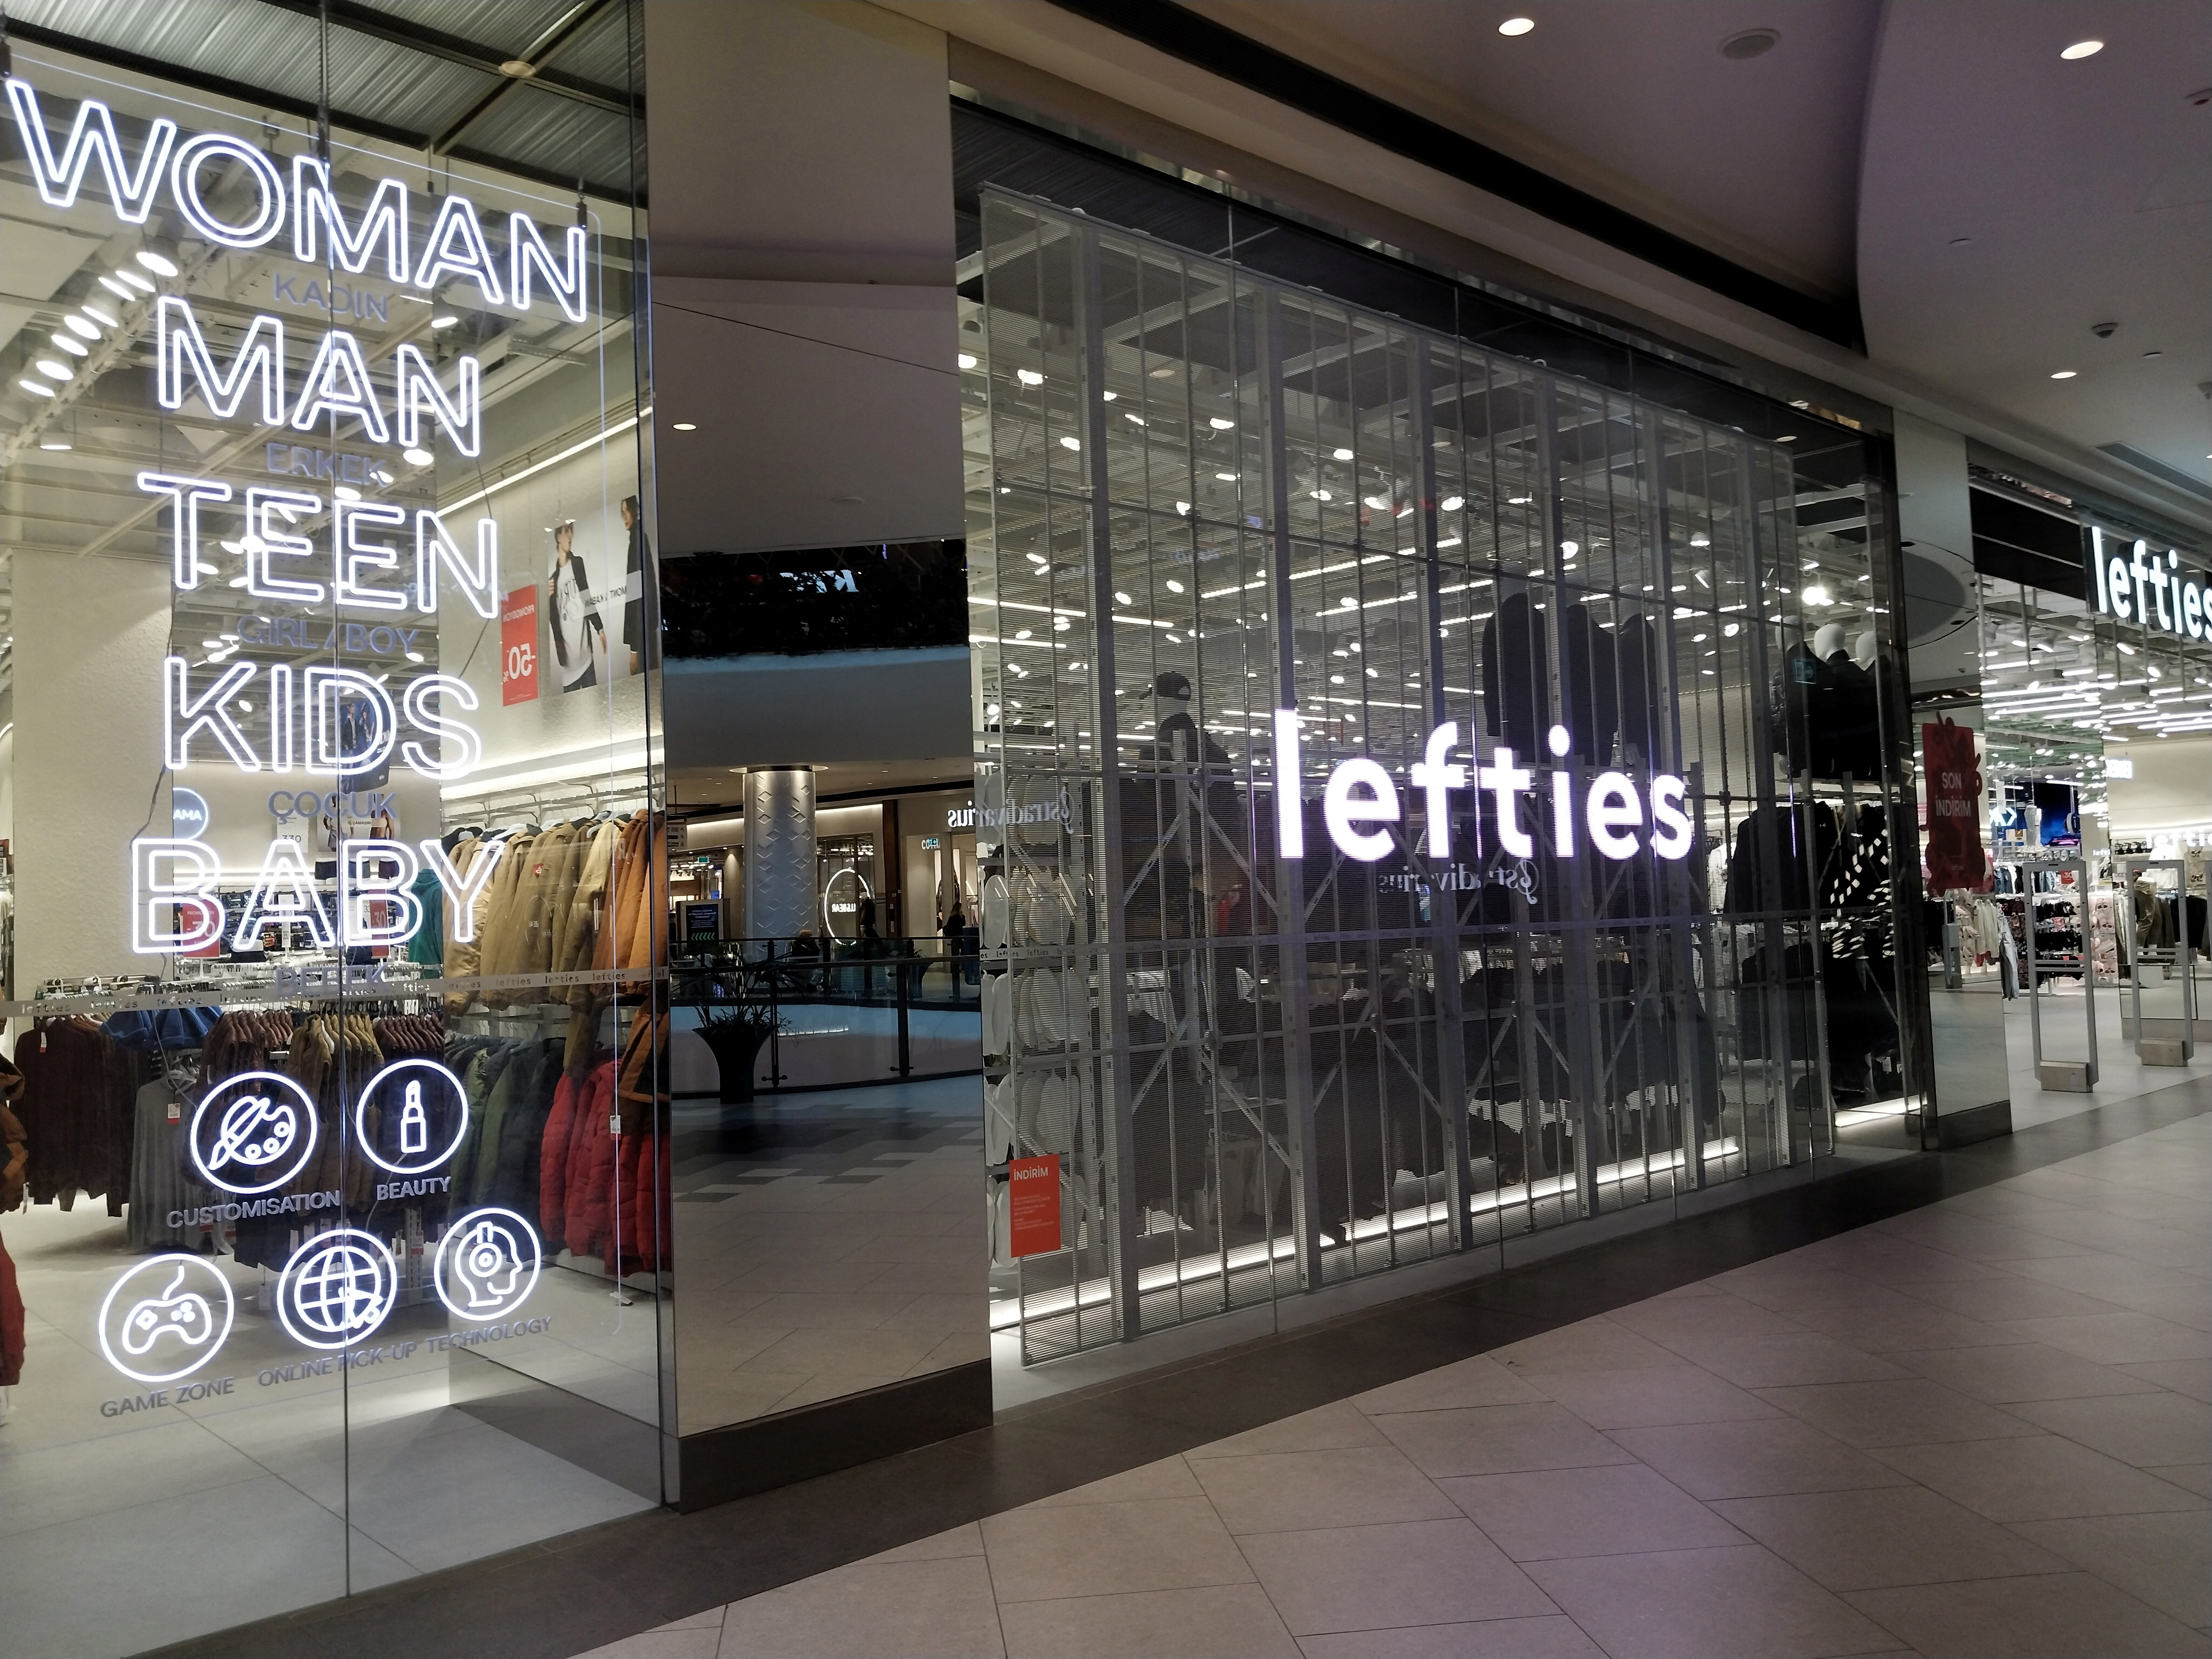 Women'Secret drives international expansion with new stores in Russia